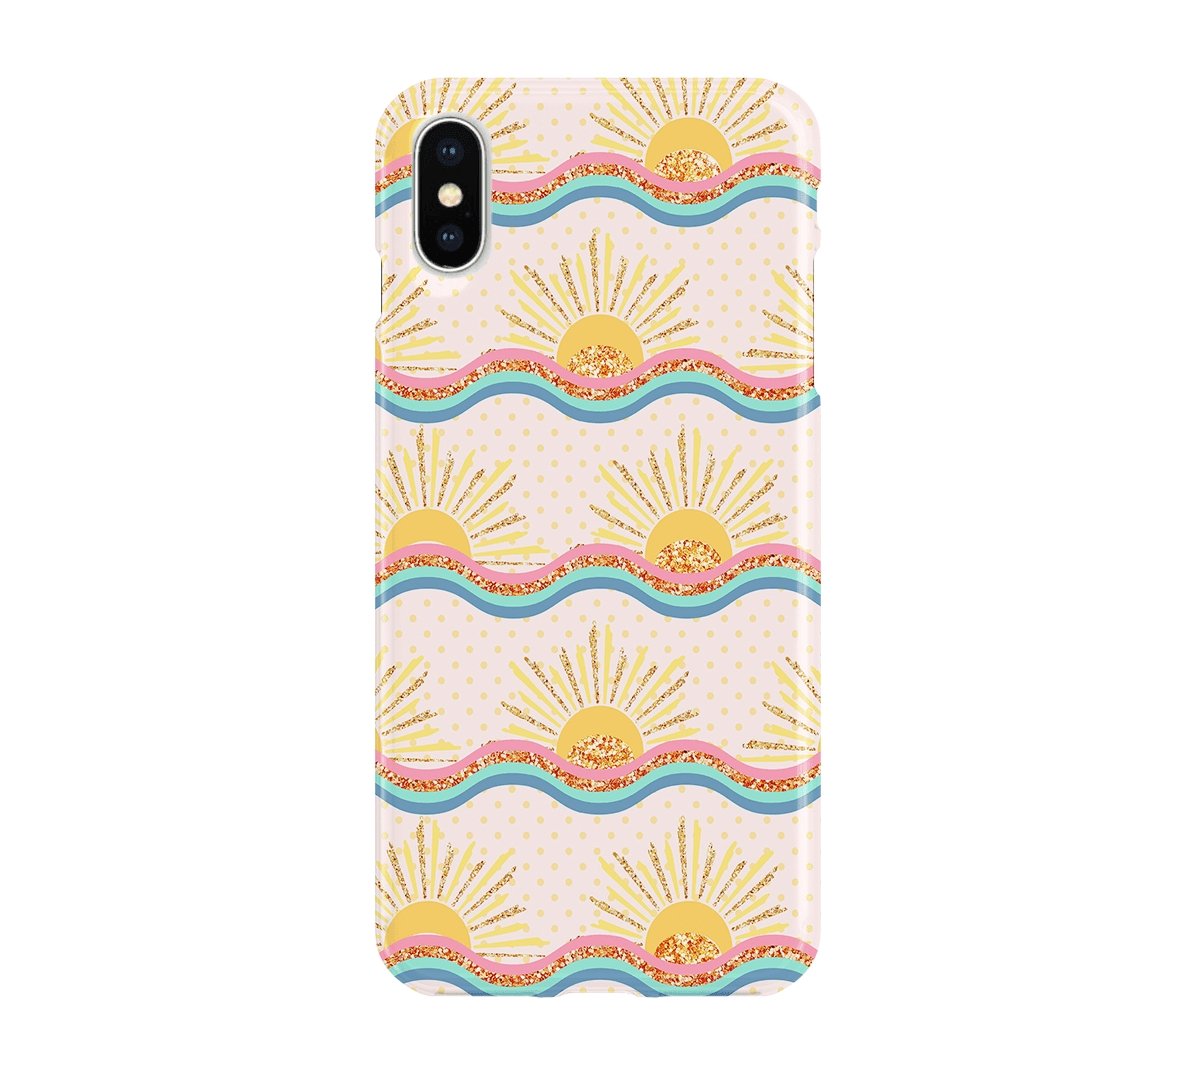 Happy Sun - iPhone phone case designs by CaseSwagger